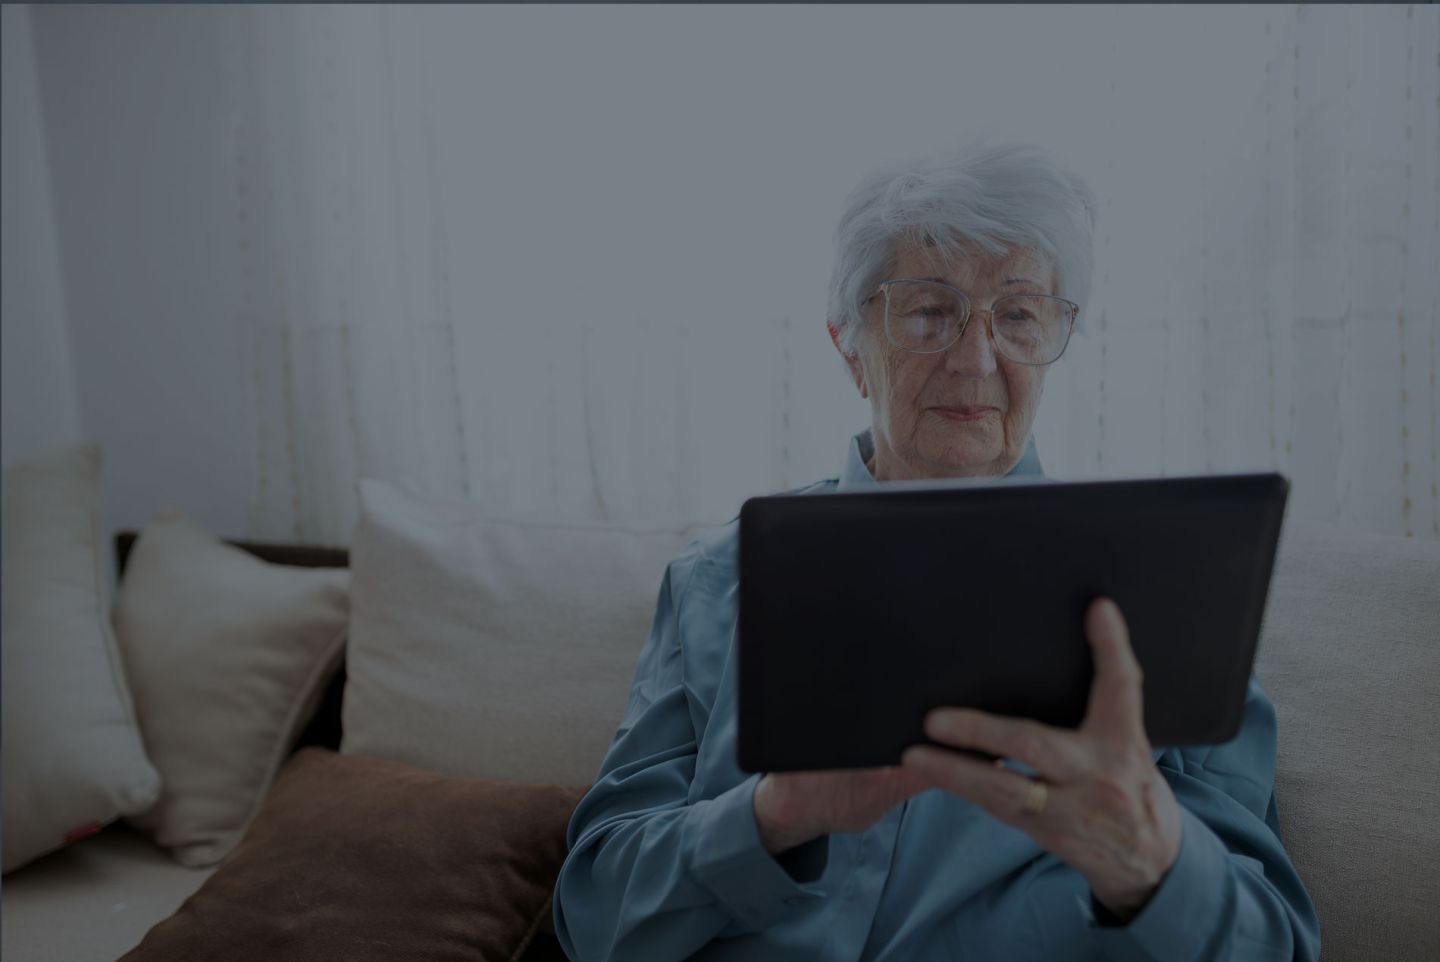 What You Need to Know About Baby Boomers and Telehealth